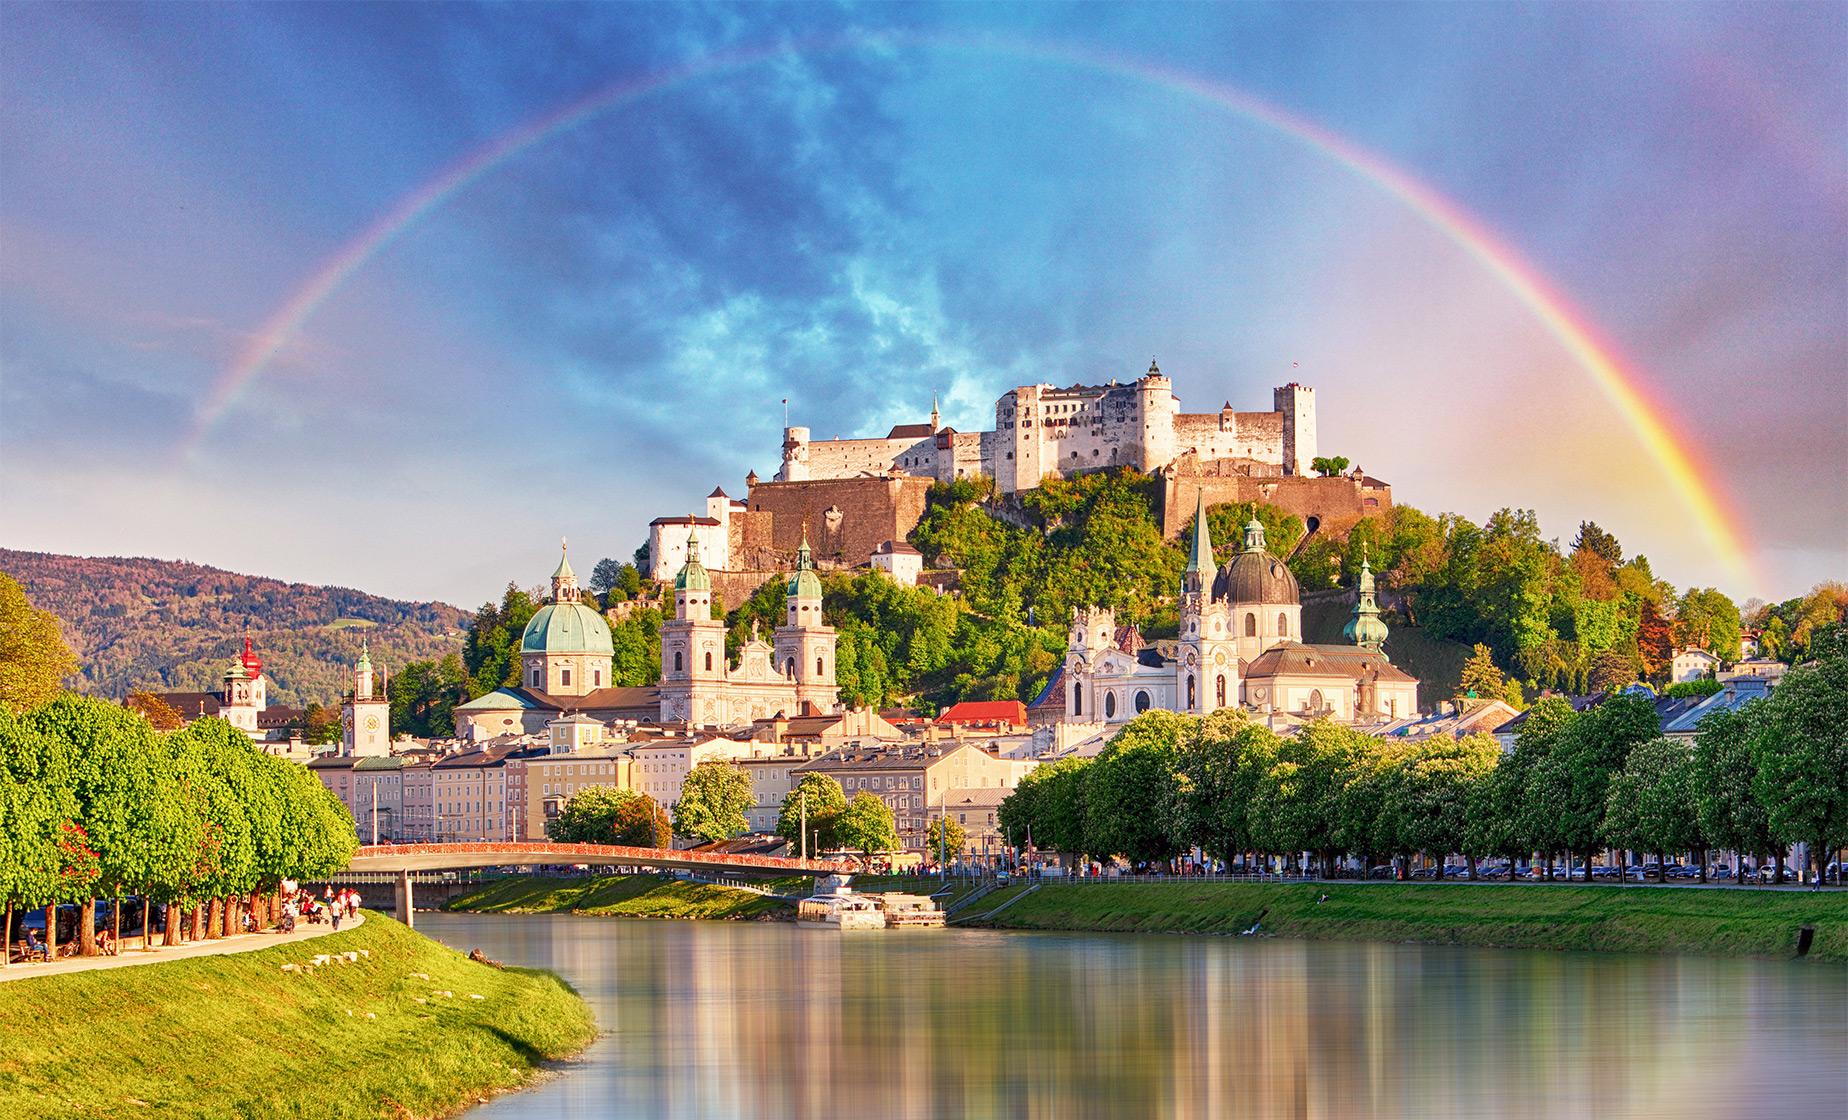 Best of Salzburg, Mozart and The Sound of Music